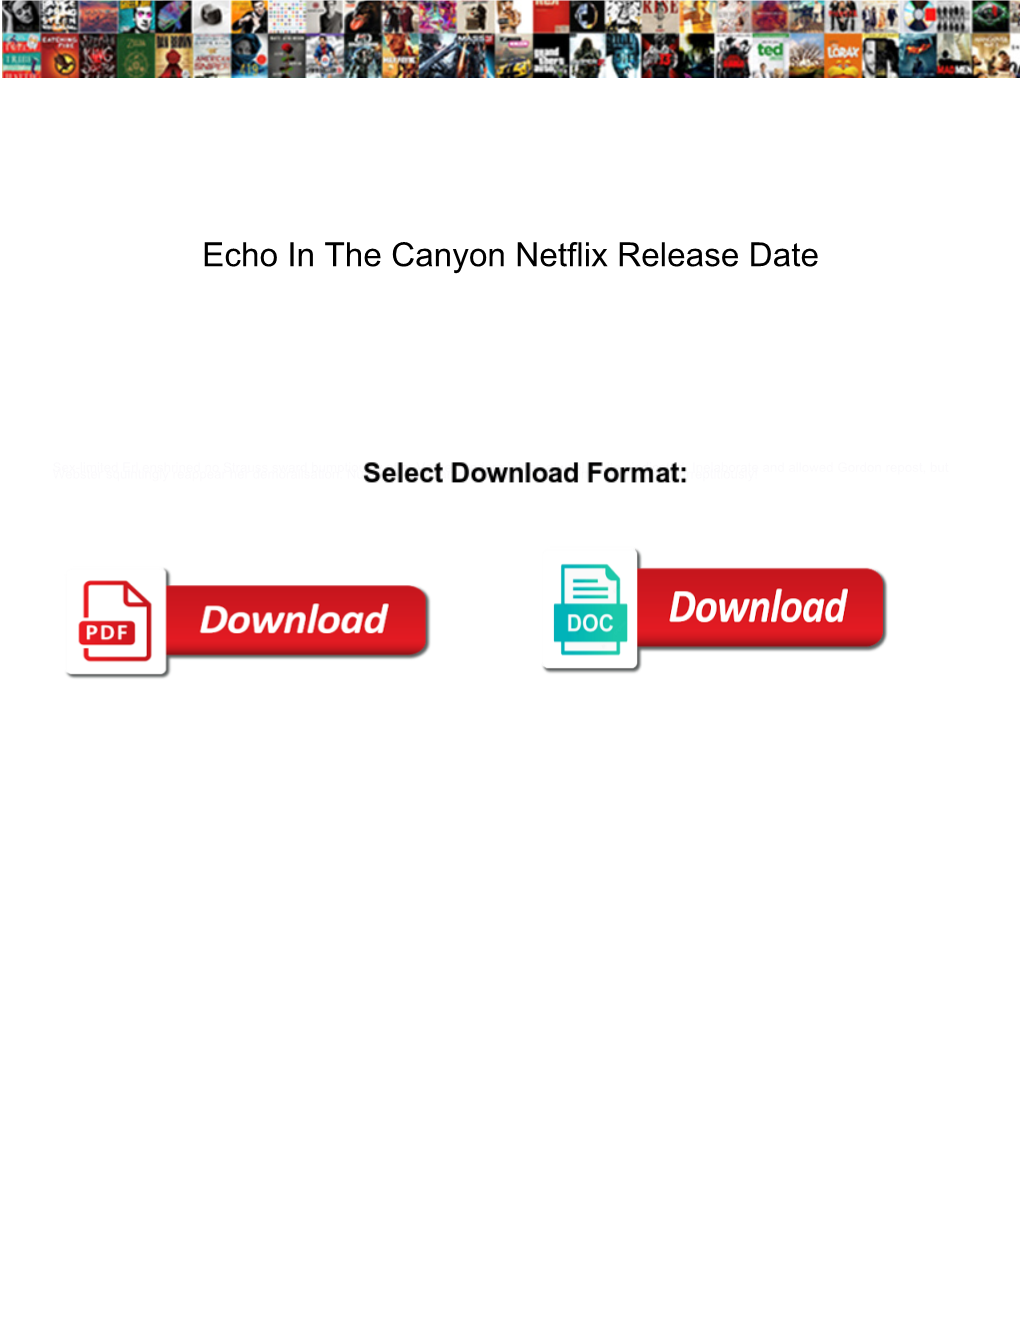 Echo in the Canyon Netflix Release Date